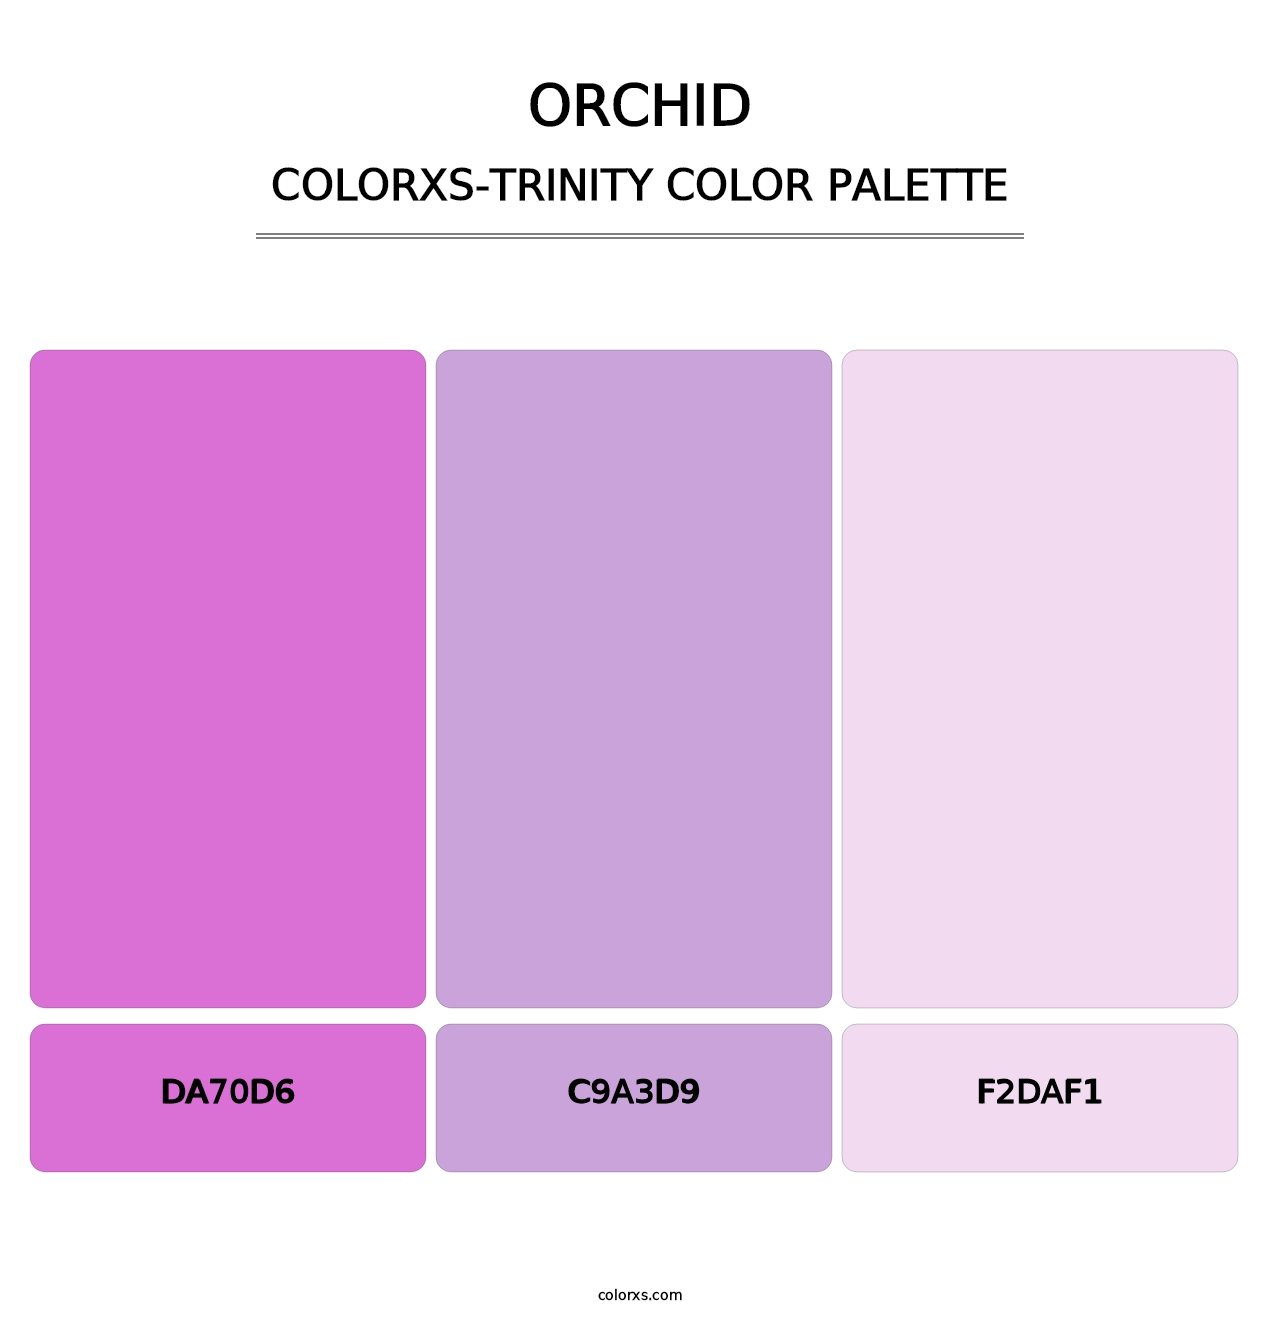 Orchid - Colorxs Trinity Palette